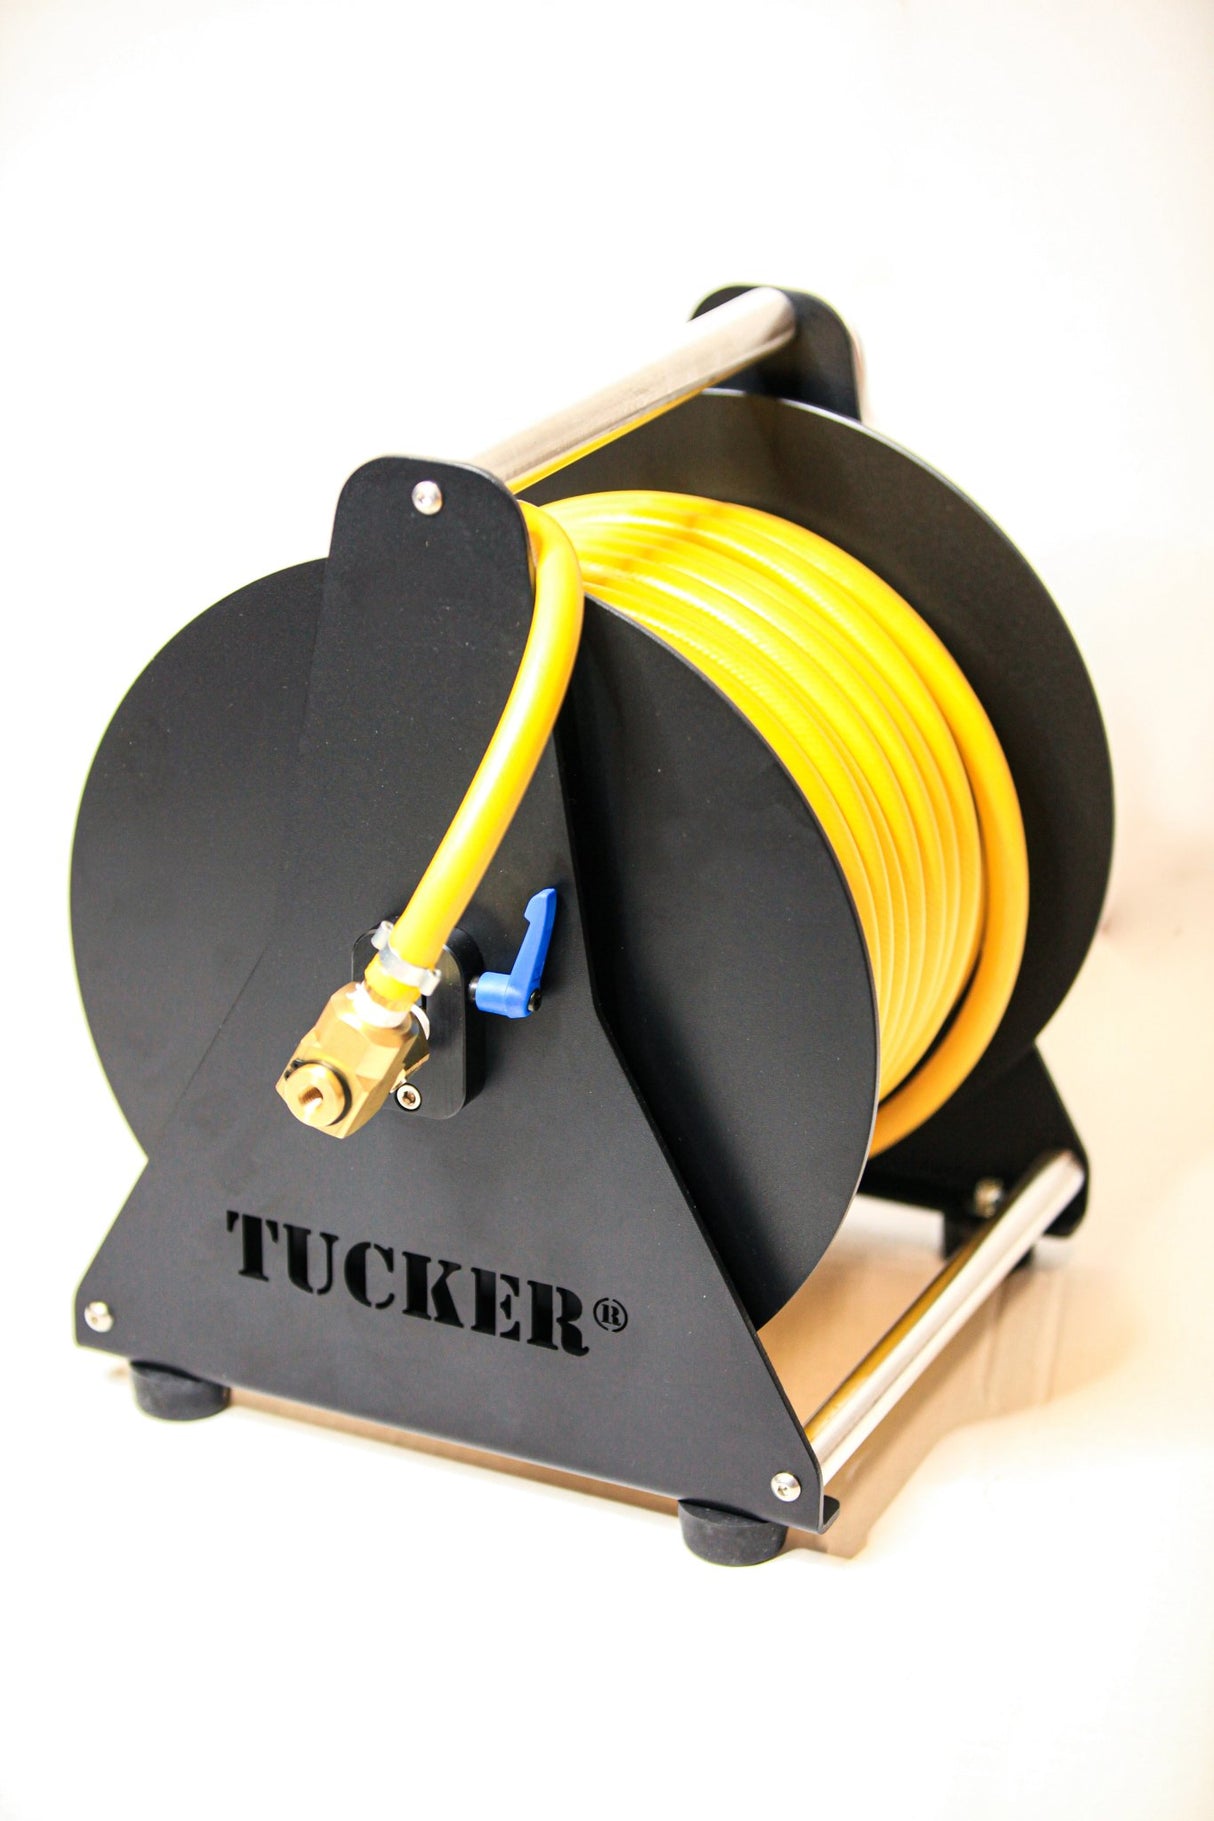 The ULTIMATE Commercial Kit 70' - Tucker® USA#